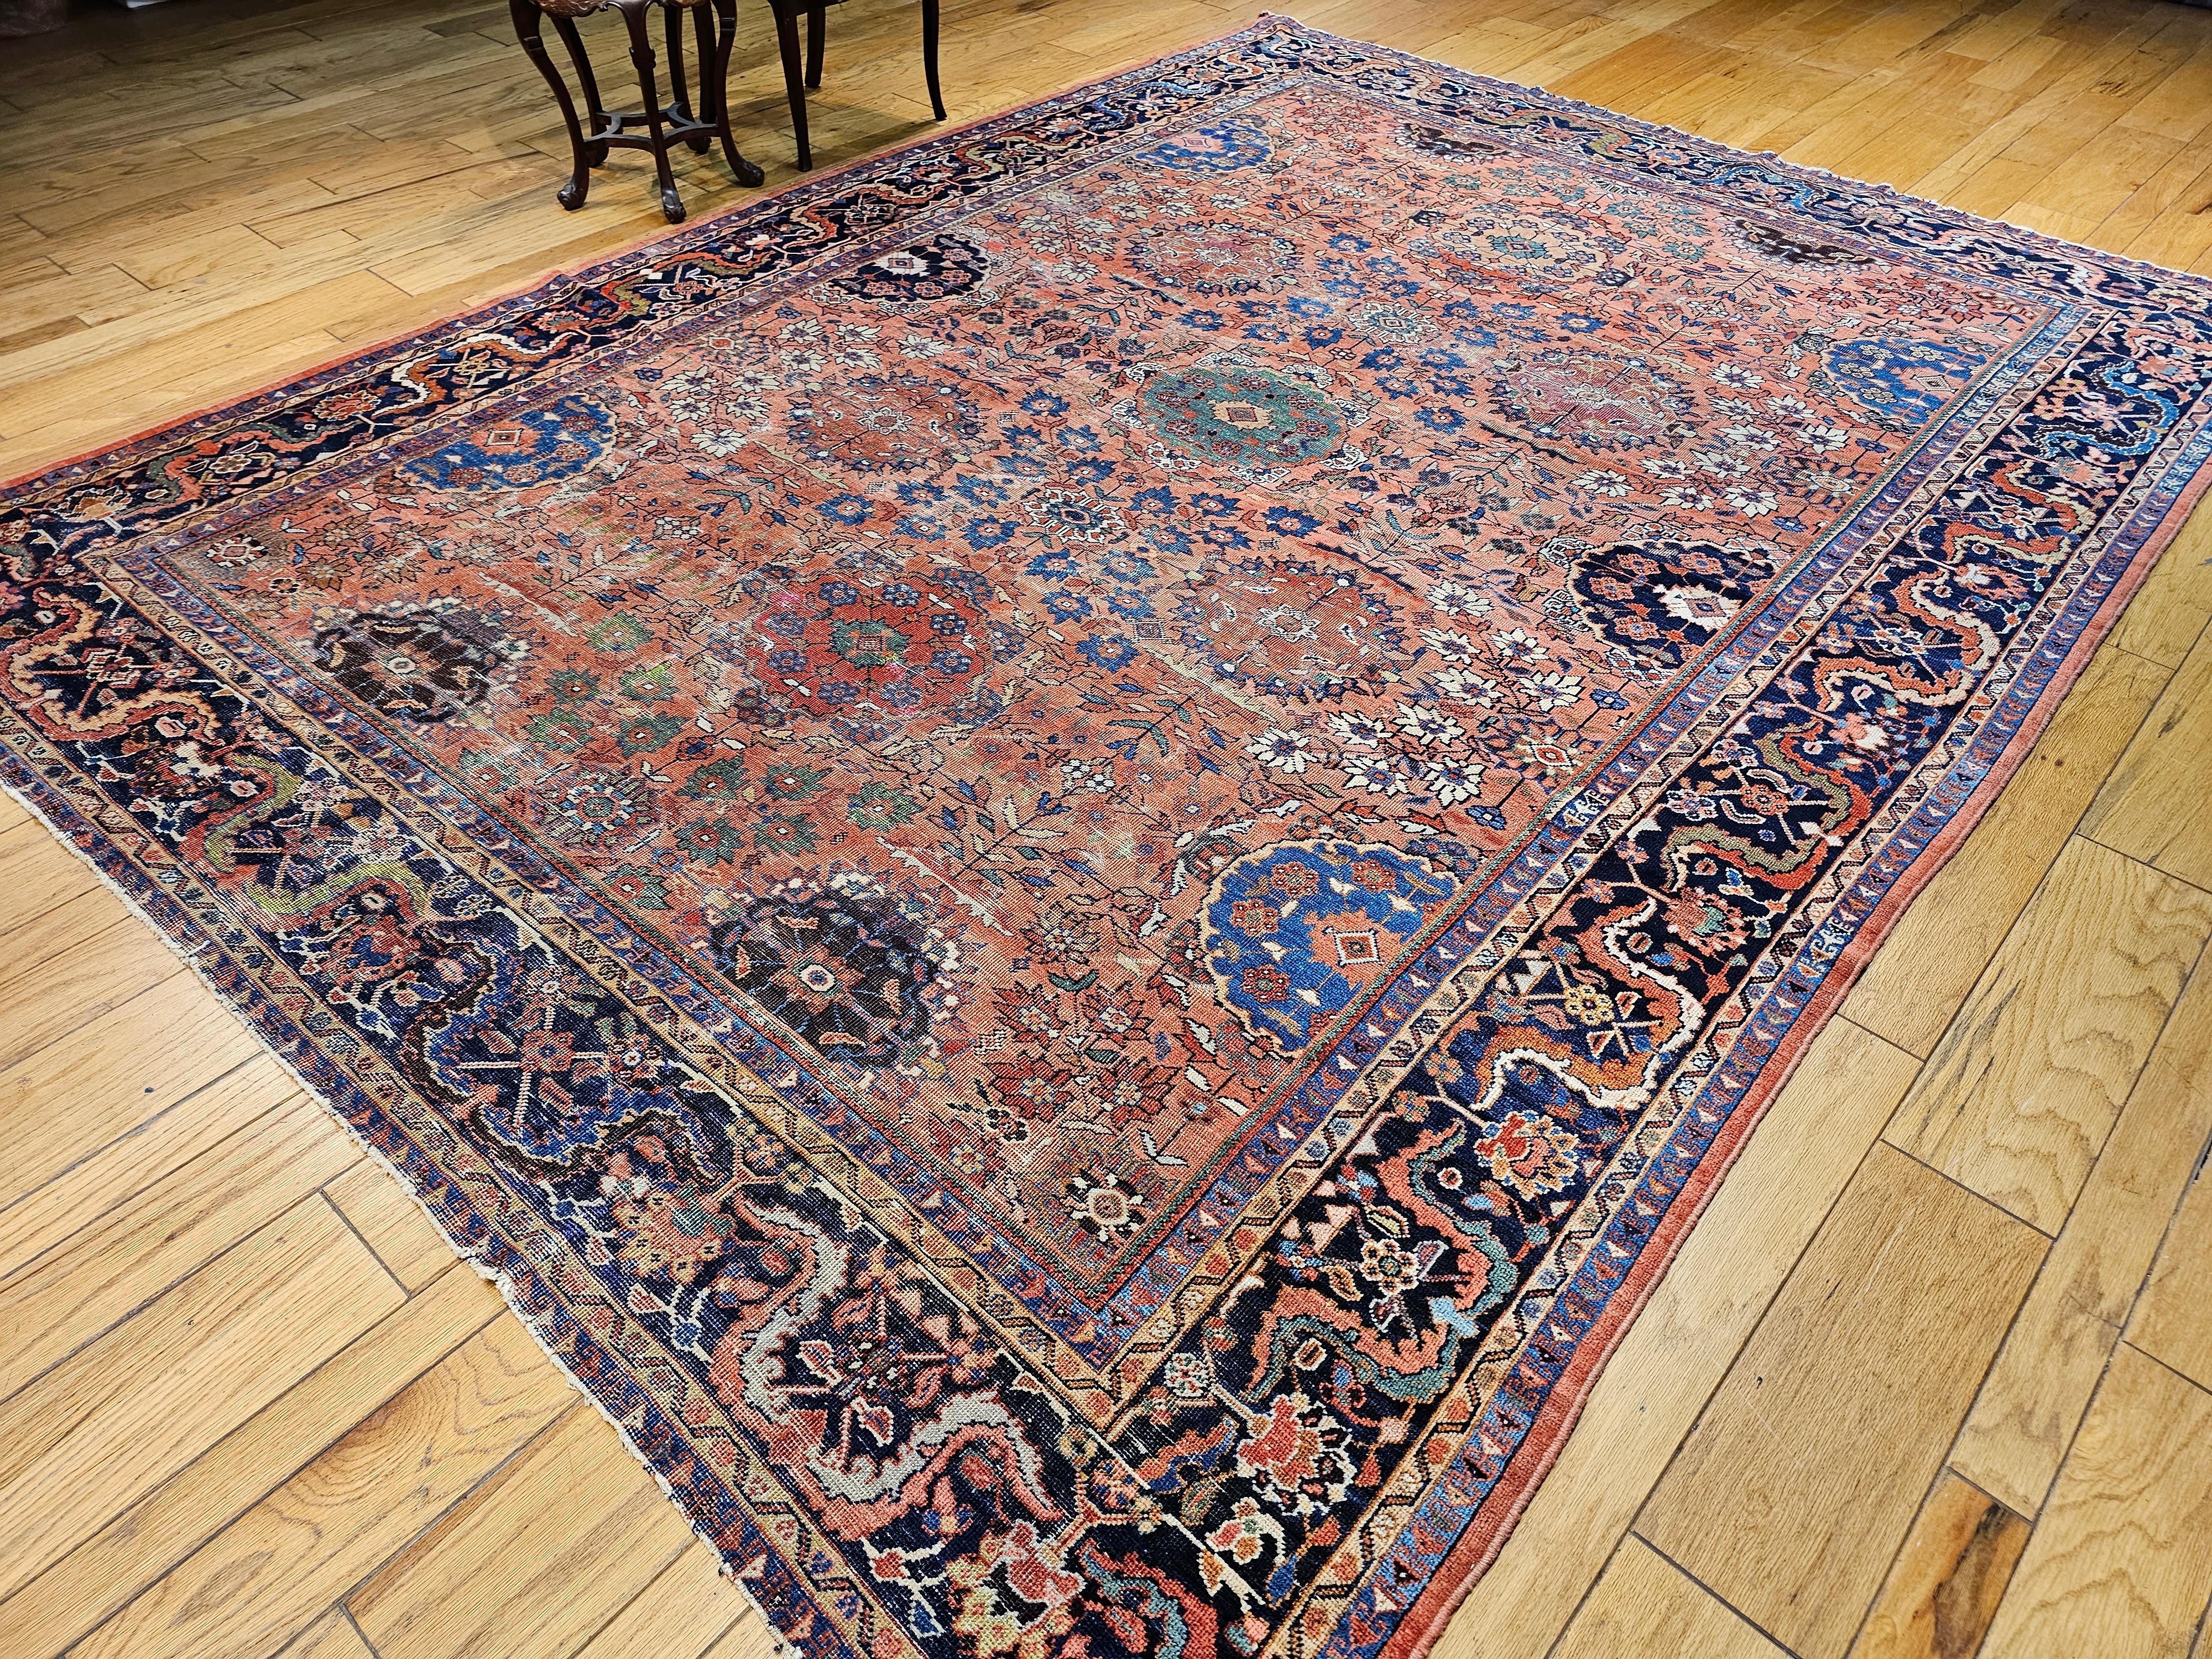 Vintage Persian Mahal Sultanabad Room Size Rug in Brick Red, Navy Blue 9